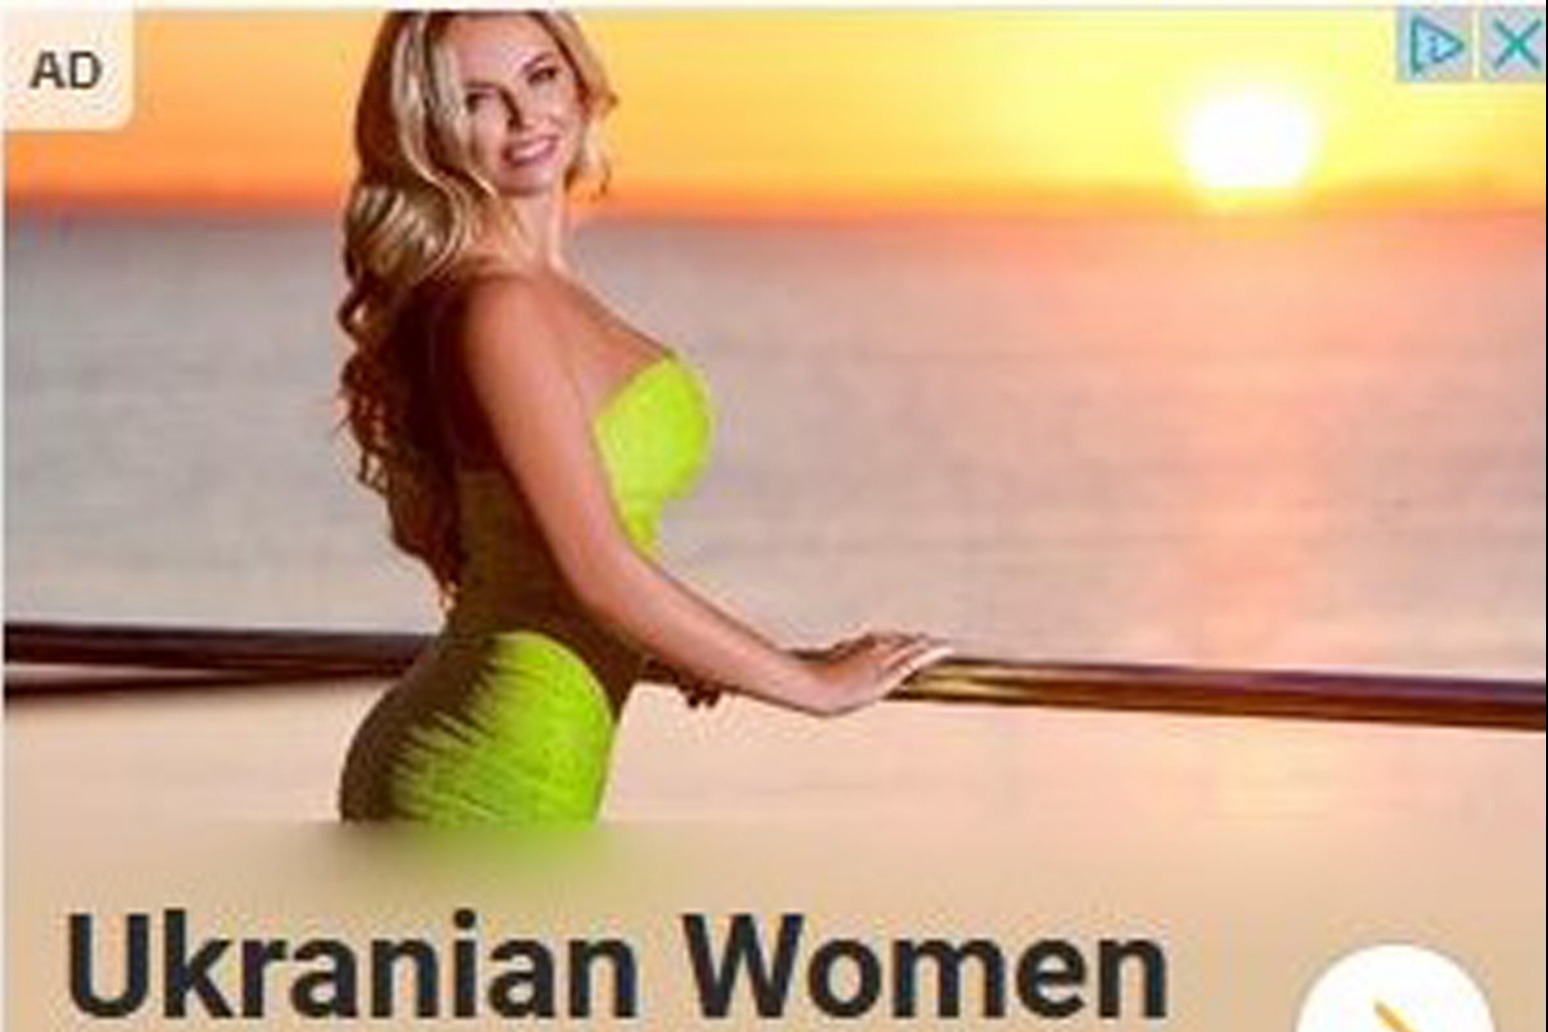 Dating ads offering chance to meet ‘lonely’ Ukrainian women is banned 